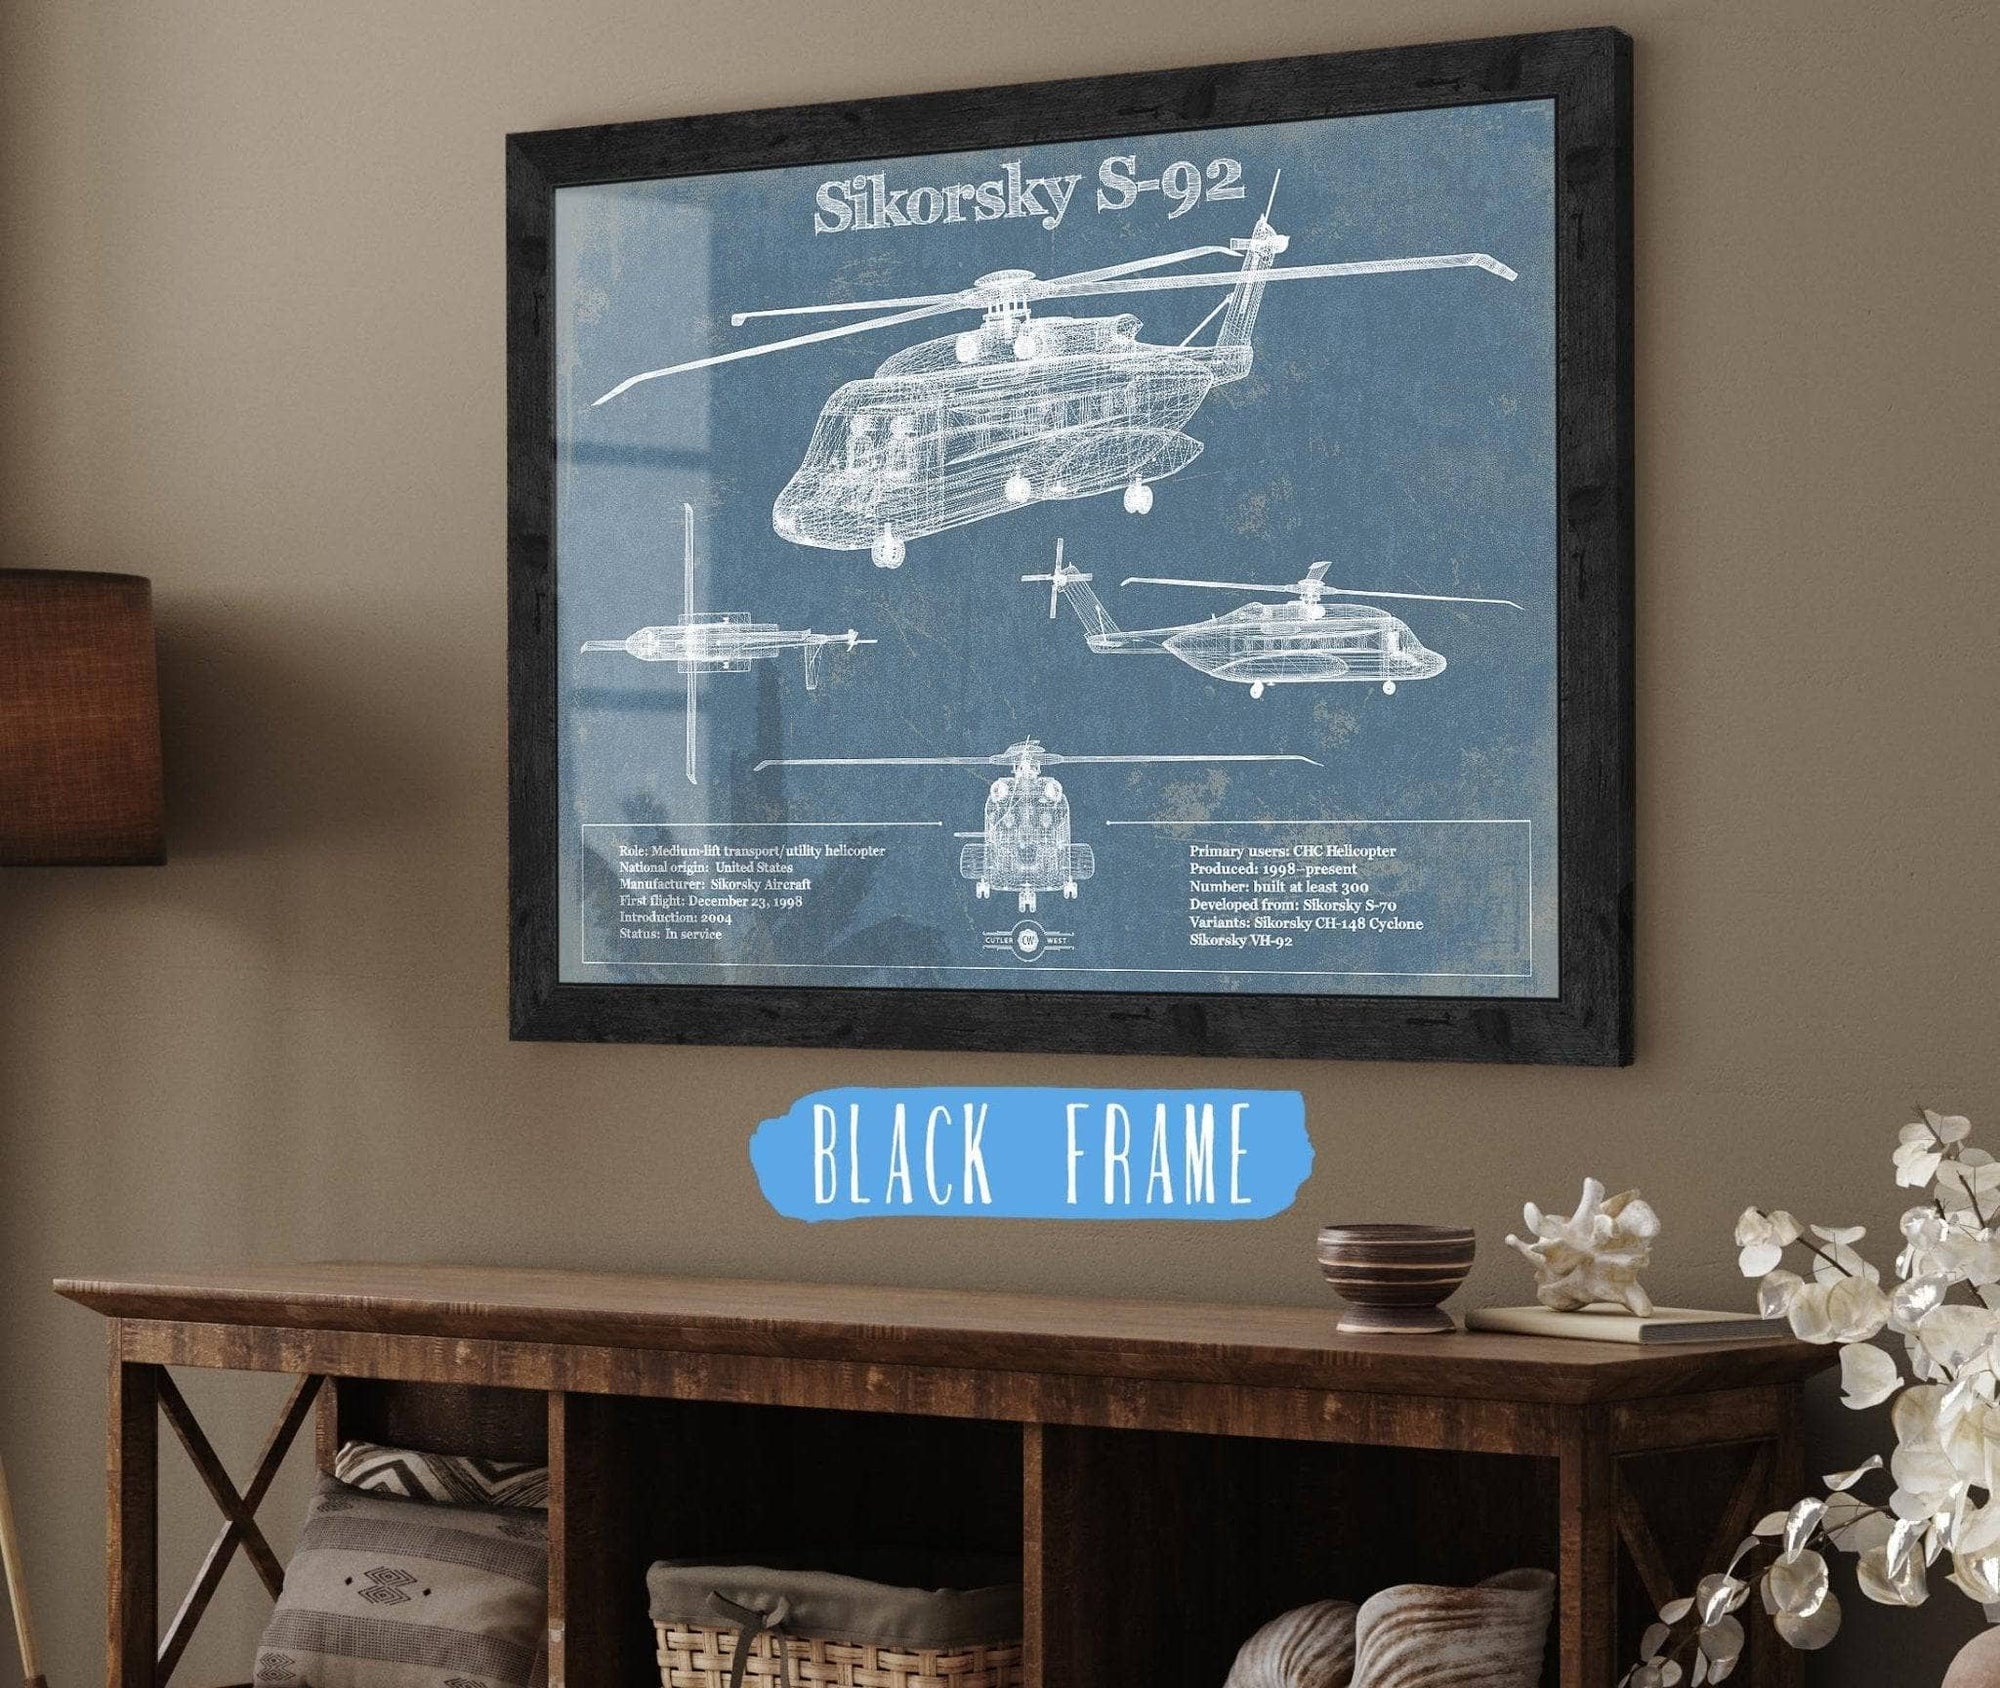 Cutler West Military Aircraft 14" x 11" / Black Frame Sikorsky S-92 Helicopter Vintage Aviation Blueprint Military Print 833110073_19847